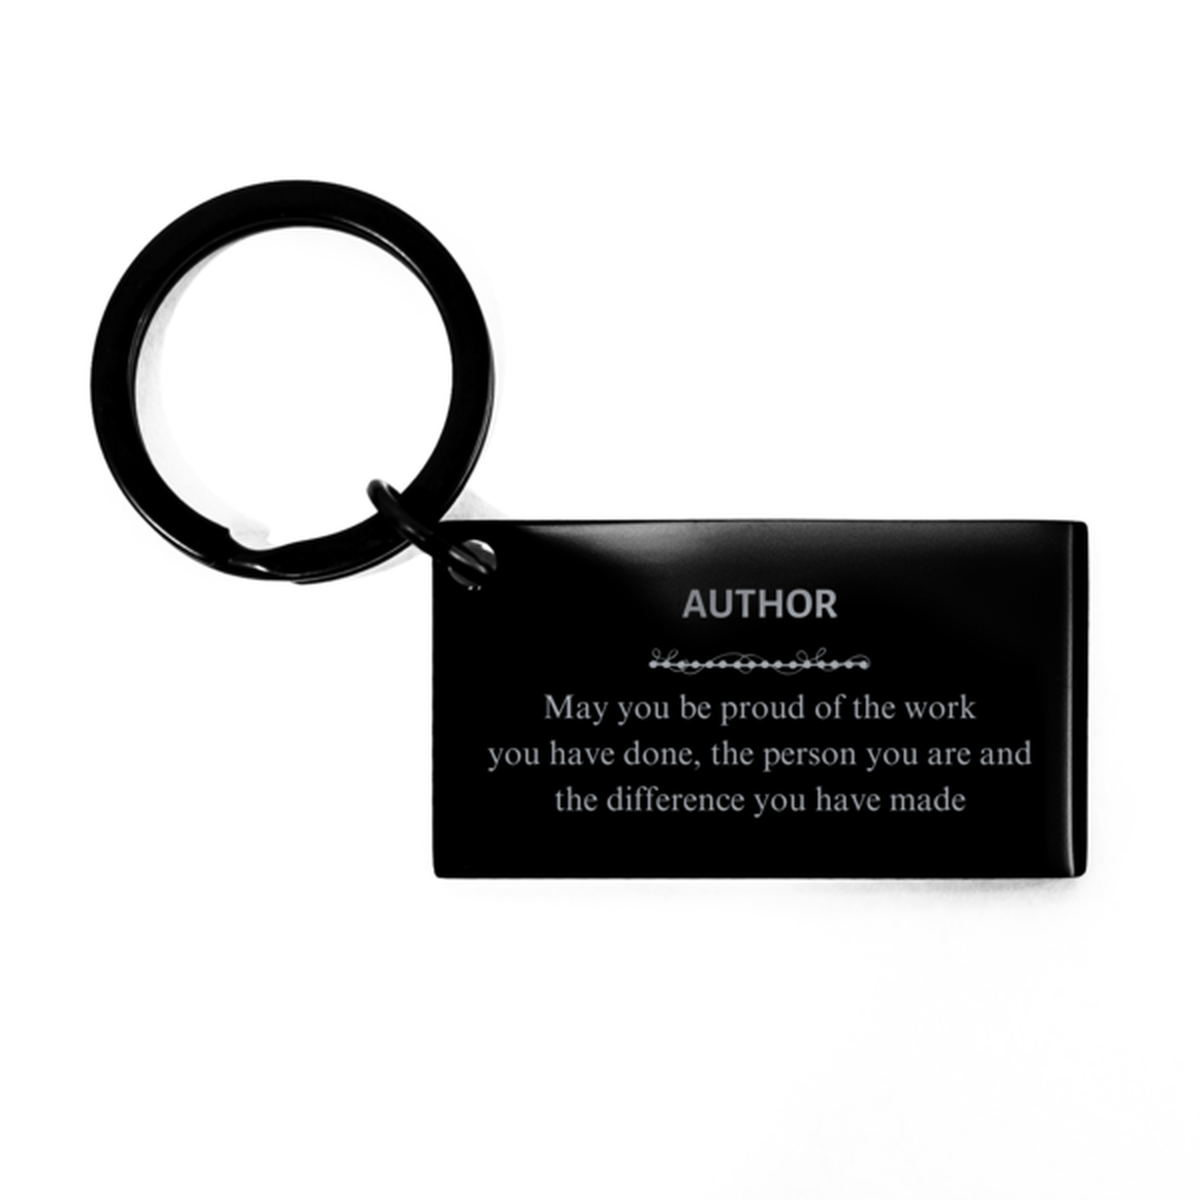 Court Clerk May you be proud of the work you have done, Retirement Author Keychain for Colleague Appreciation Gifts Amazing for Author